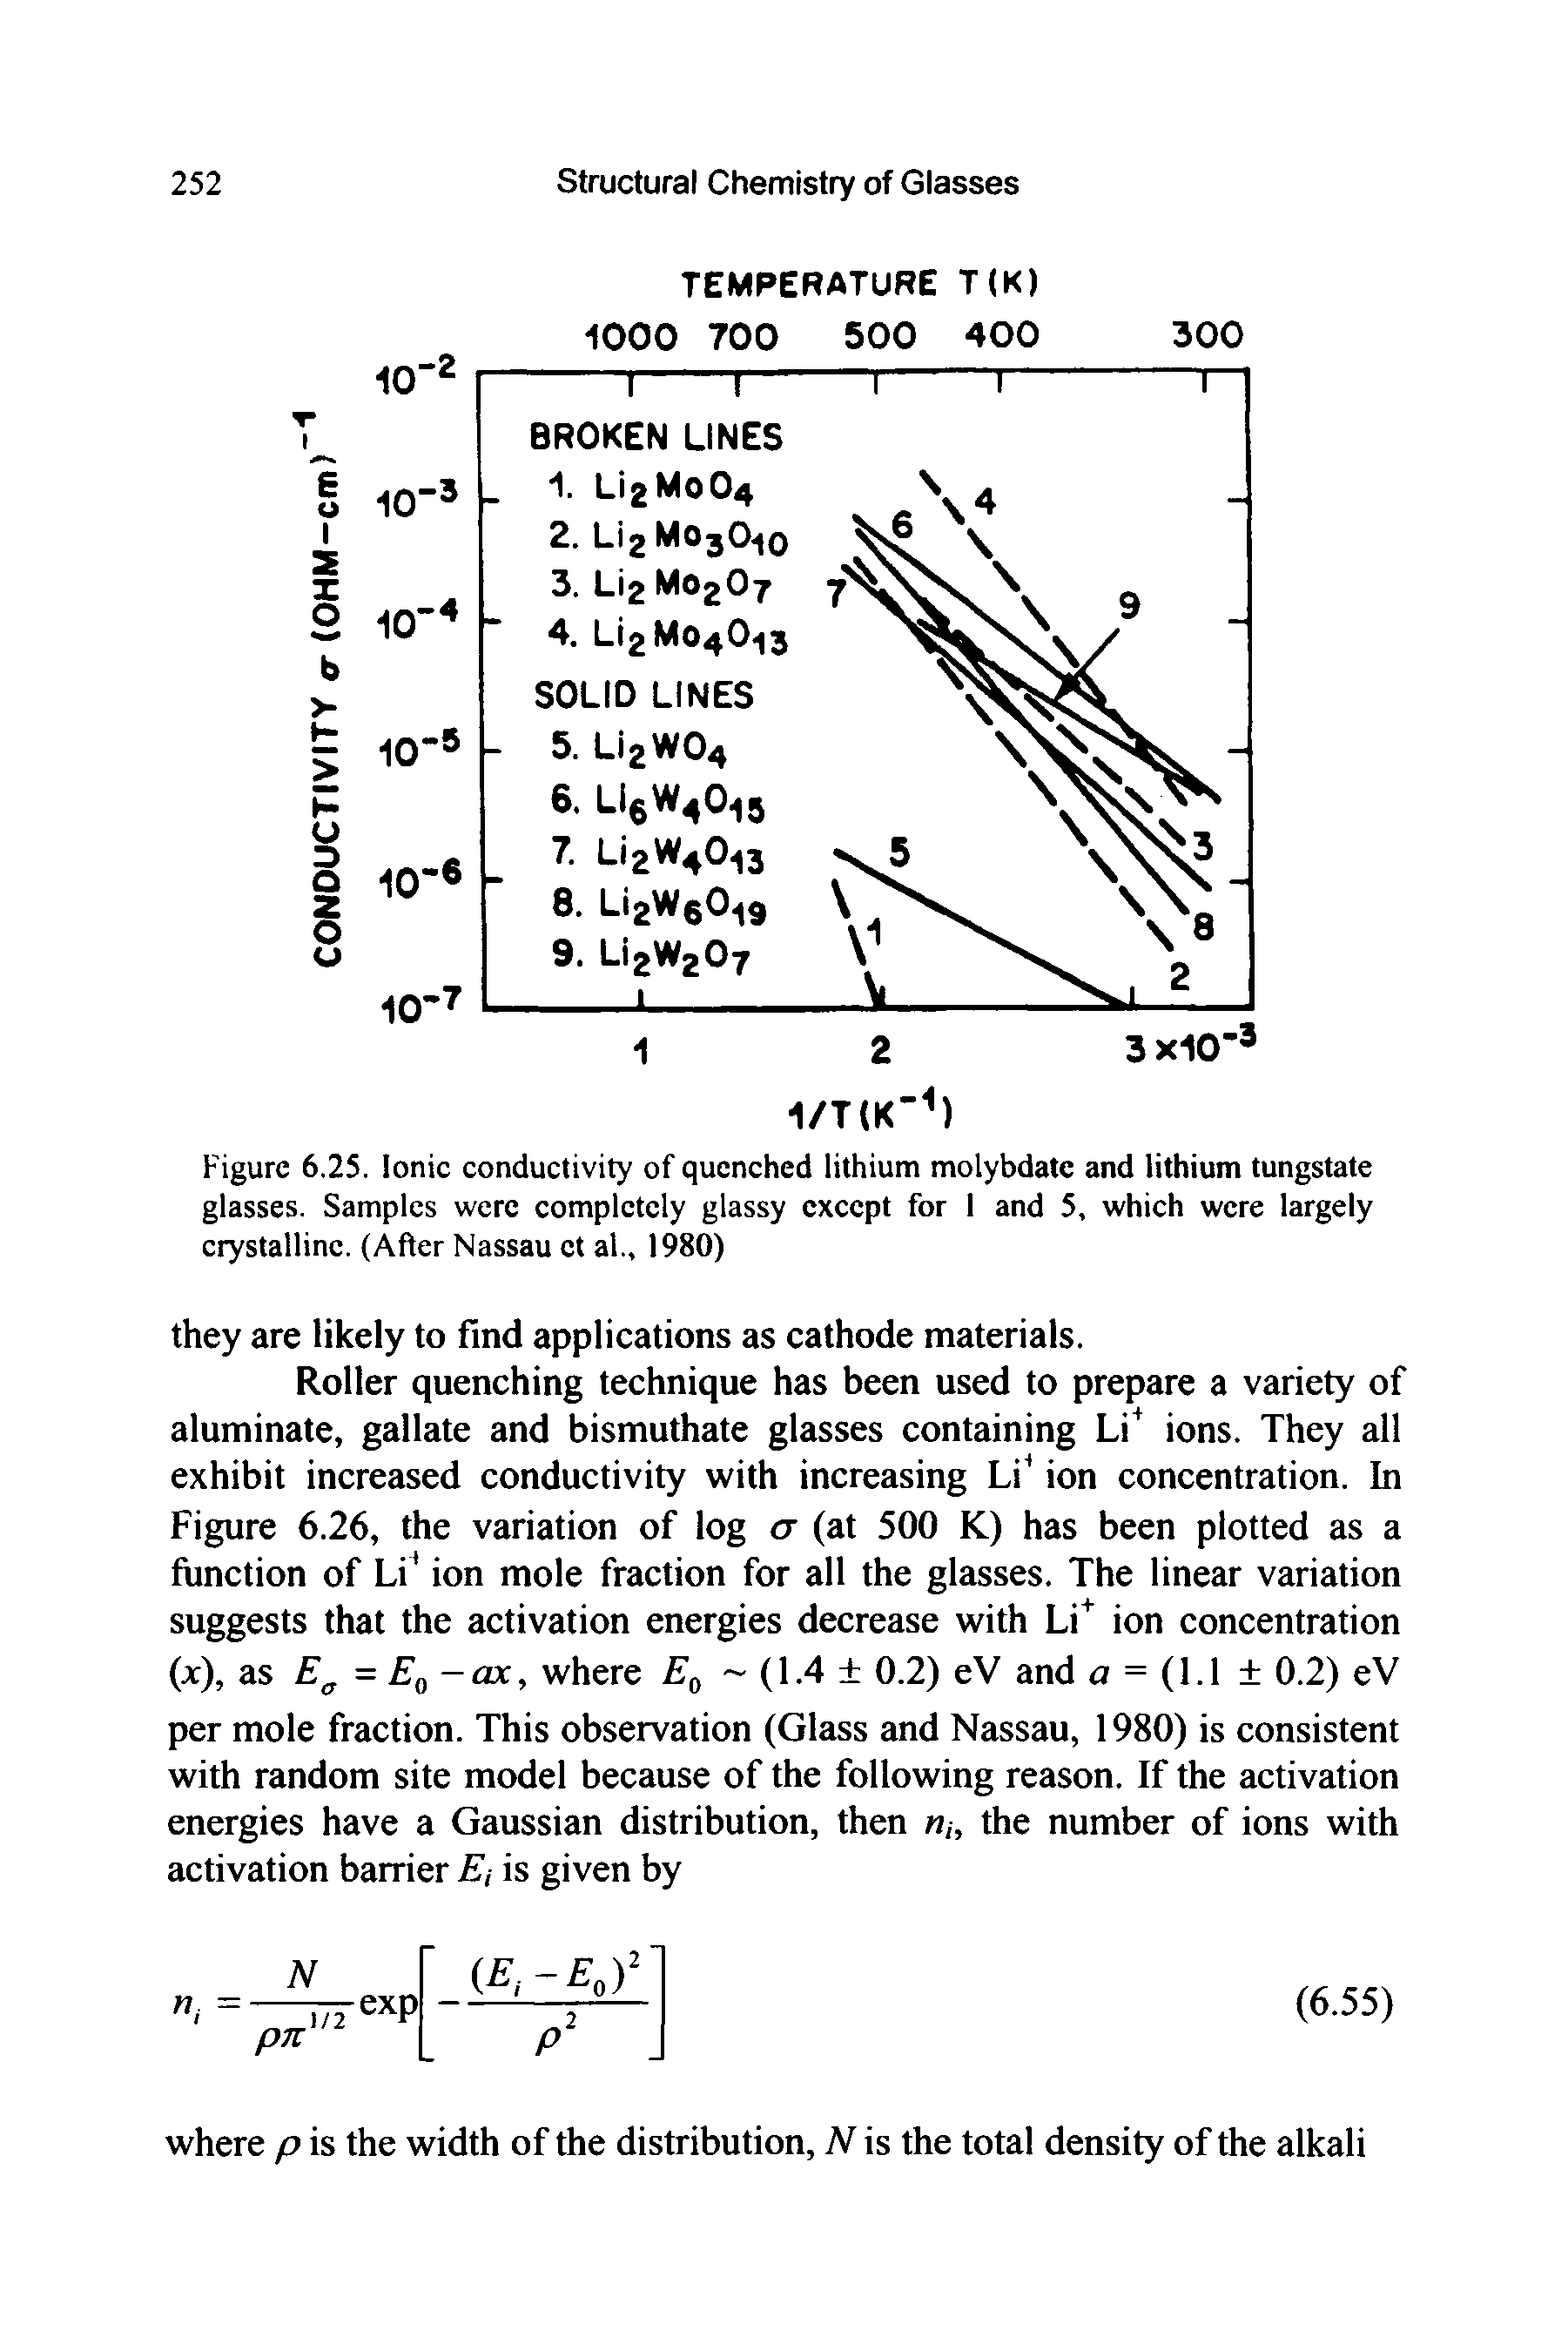 Figure 6.25. Ionic conductivity of quenched lithium molybdate and lithium tungstate glasses. Samples were completely glassy except for 1 and 5, which were largely crystalline. (After Nassau ot al., 1980)...